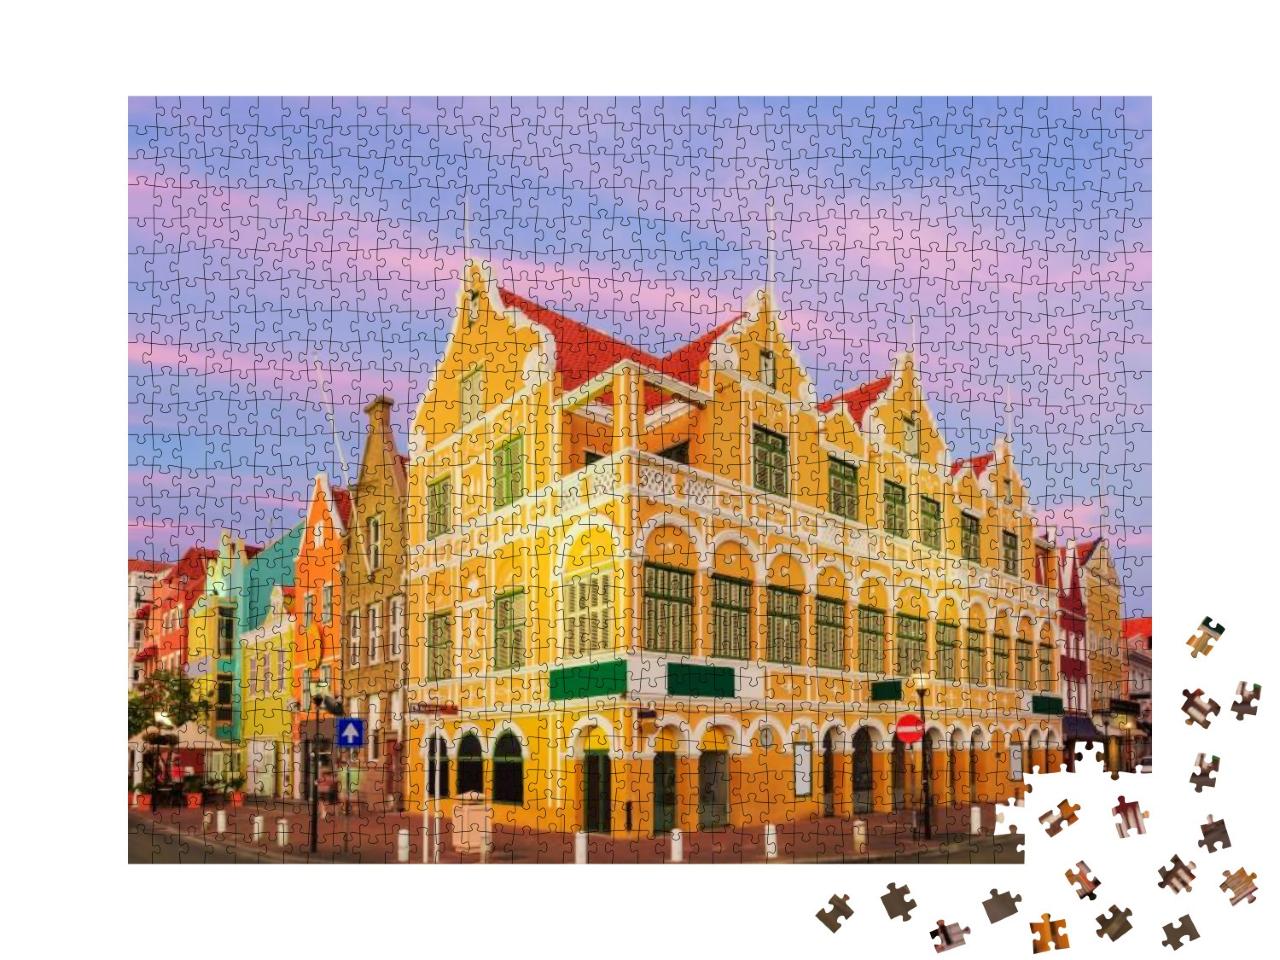 Downtown Willemstad At Twilight, Curacao, Netherlands Ant... Jigsaw Puzzle with 1000 pieces